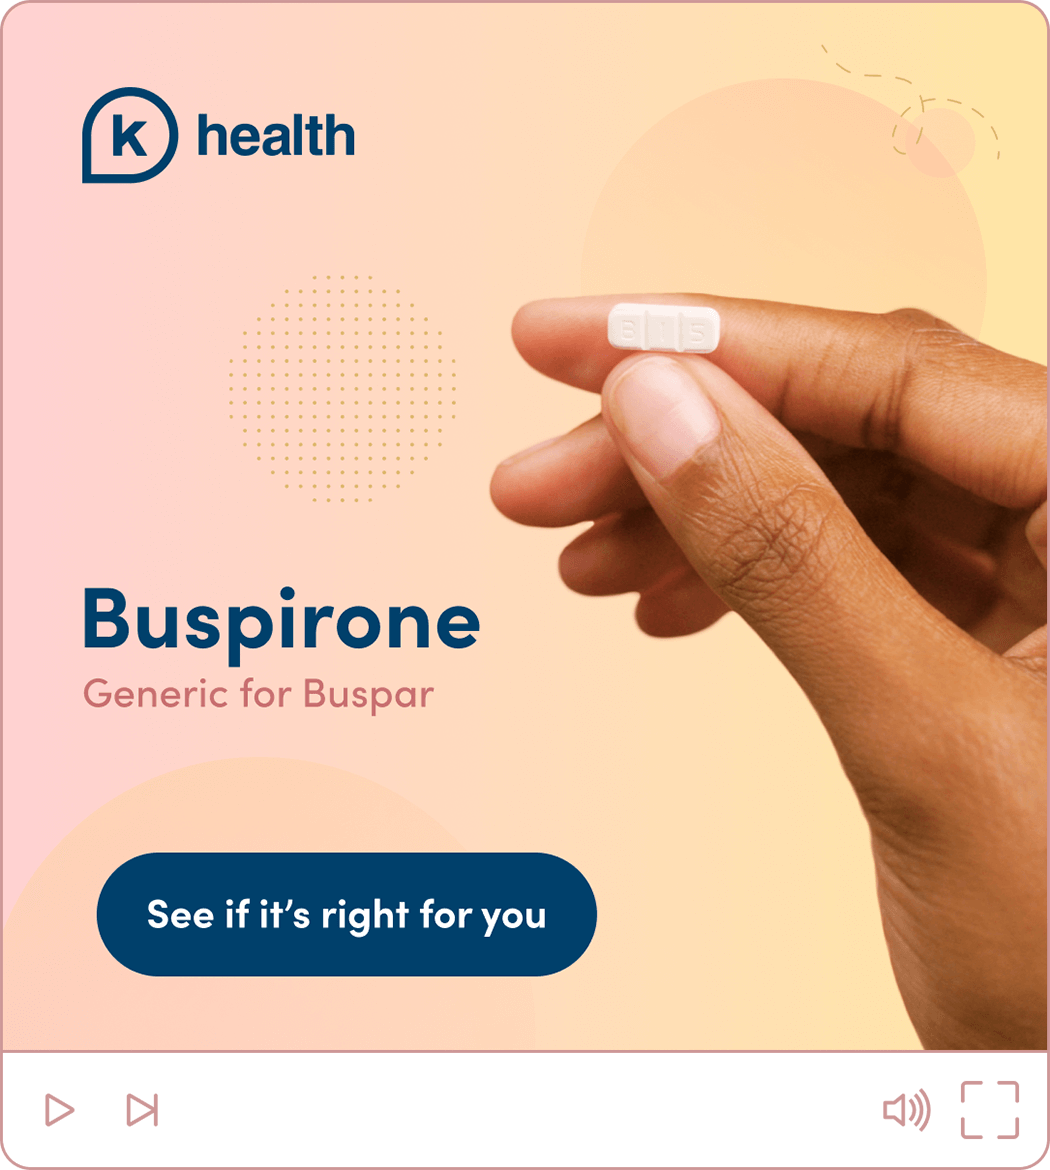 Ad for buspirone featuring a hand holding a pill, the medication name, and the K Health logo